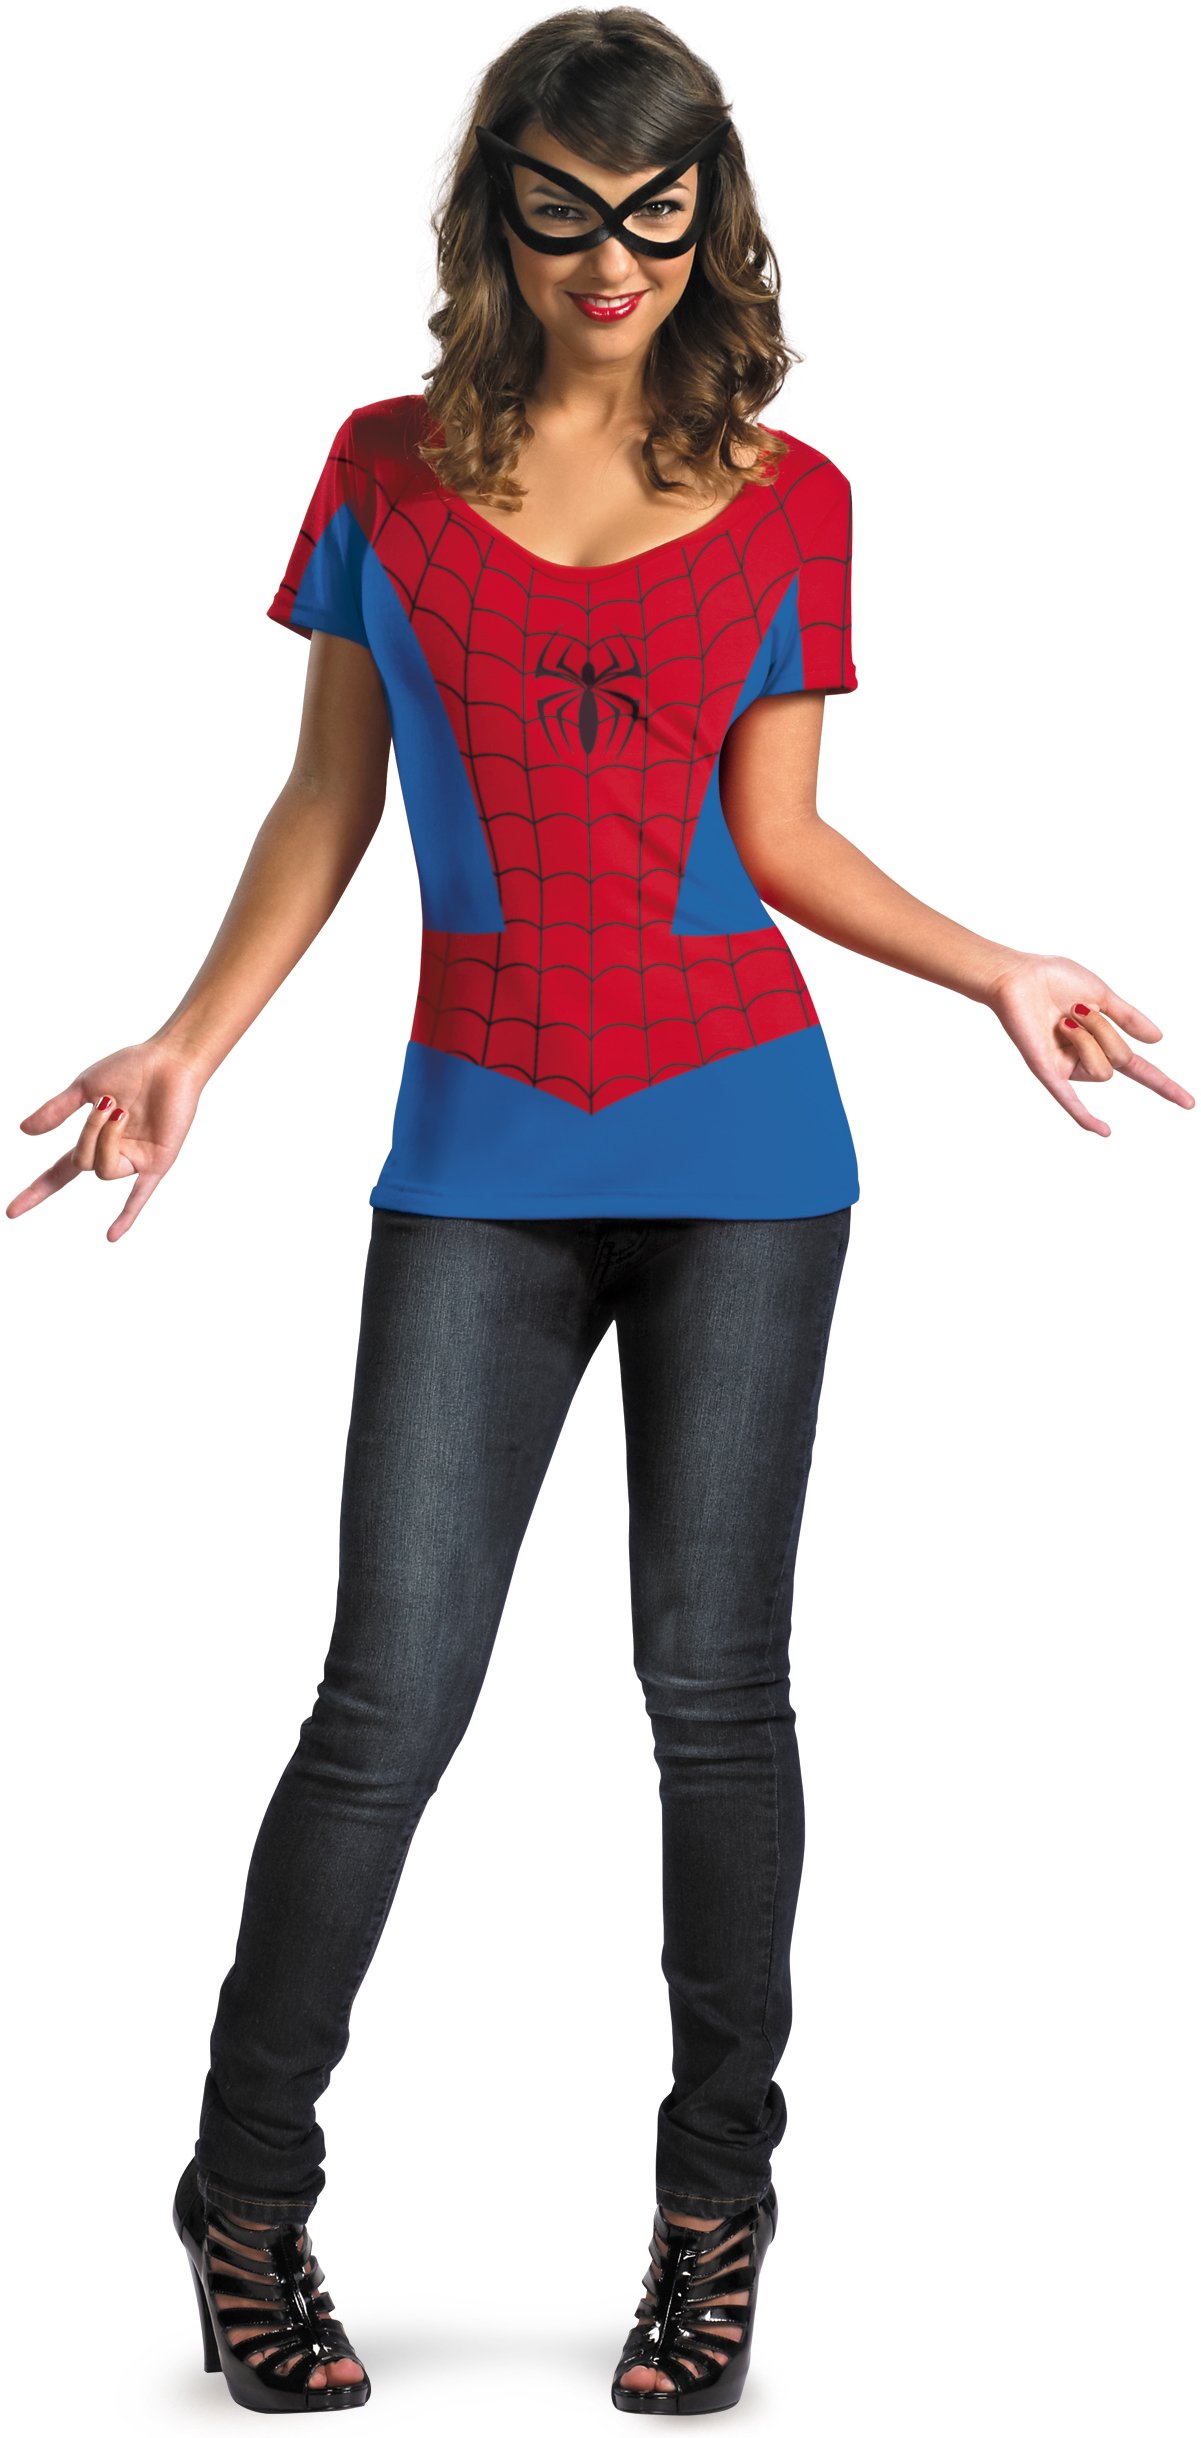 Spider-Girl Adult Costume Kit - Click Image to Close